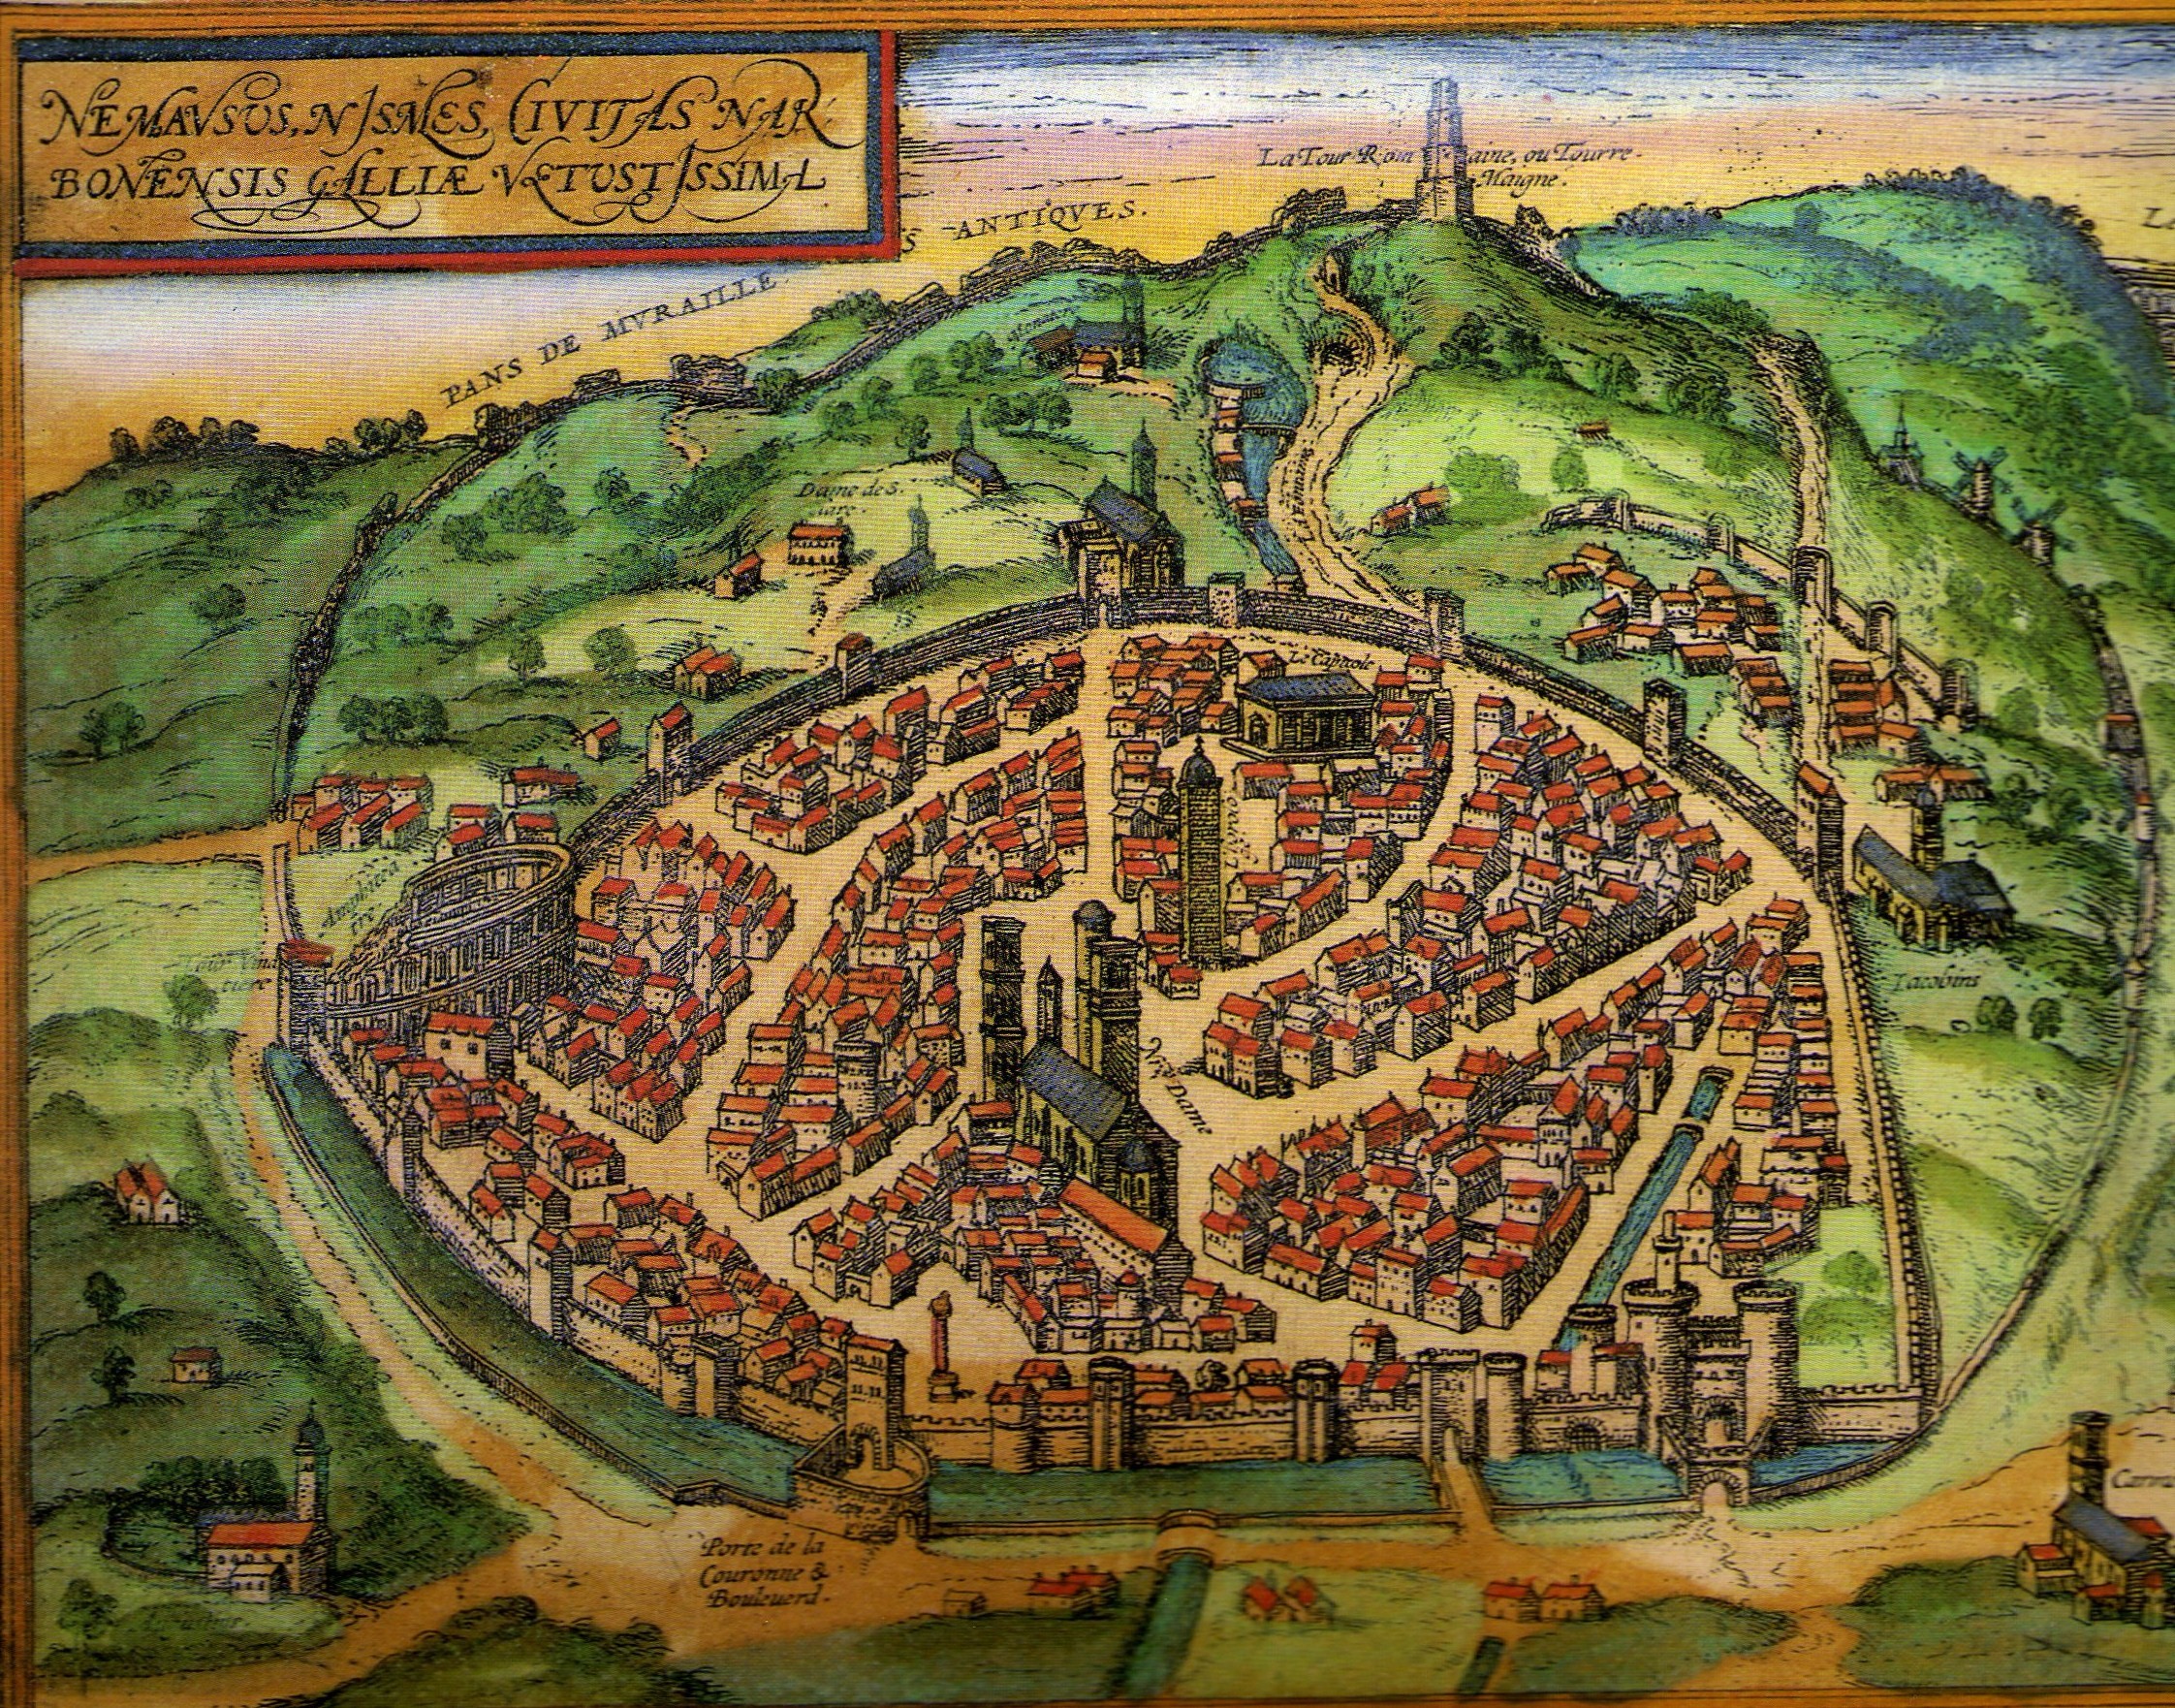 Nemausus, Nismes Civitas Narbonensis surrounded by its walls, after Sebastian Münster (1569)